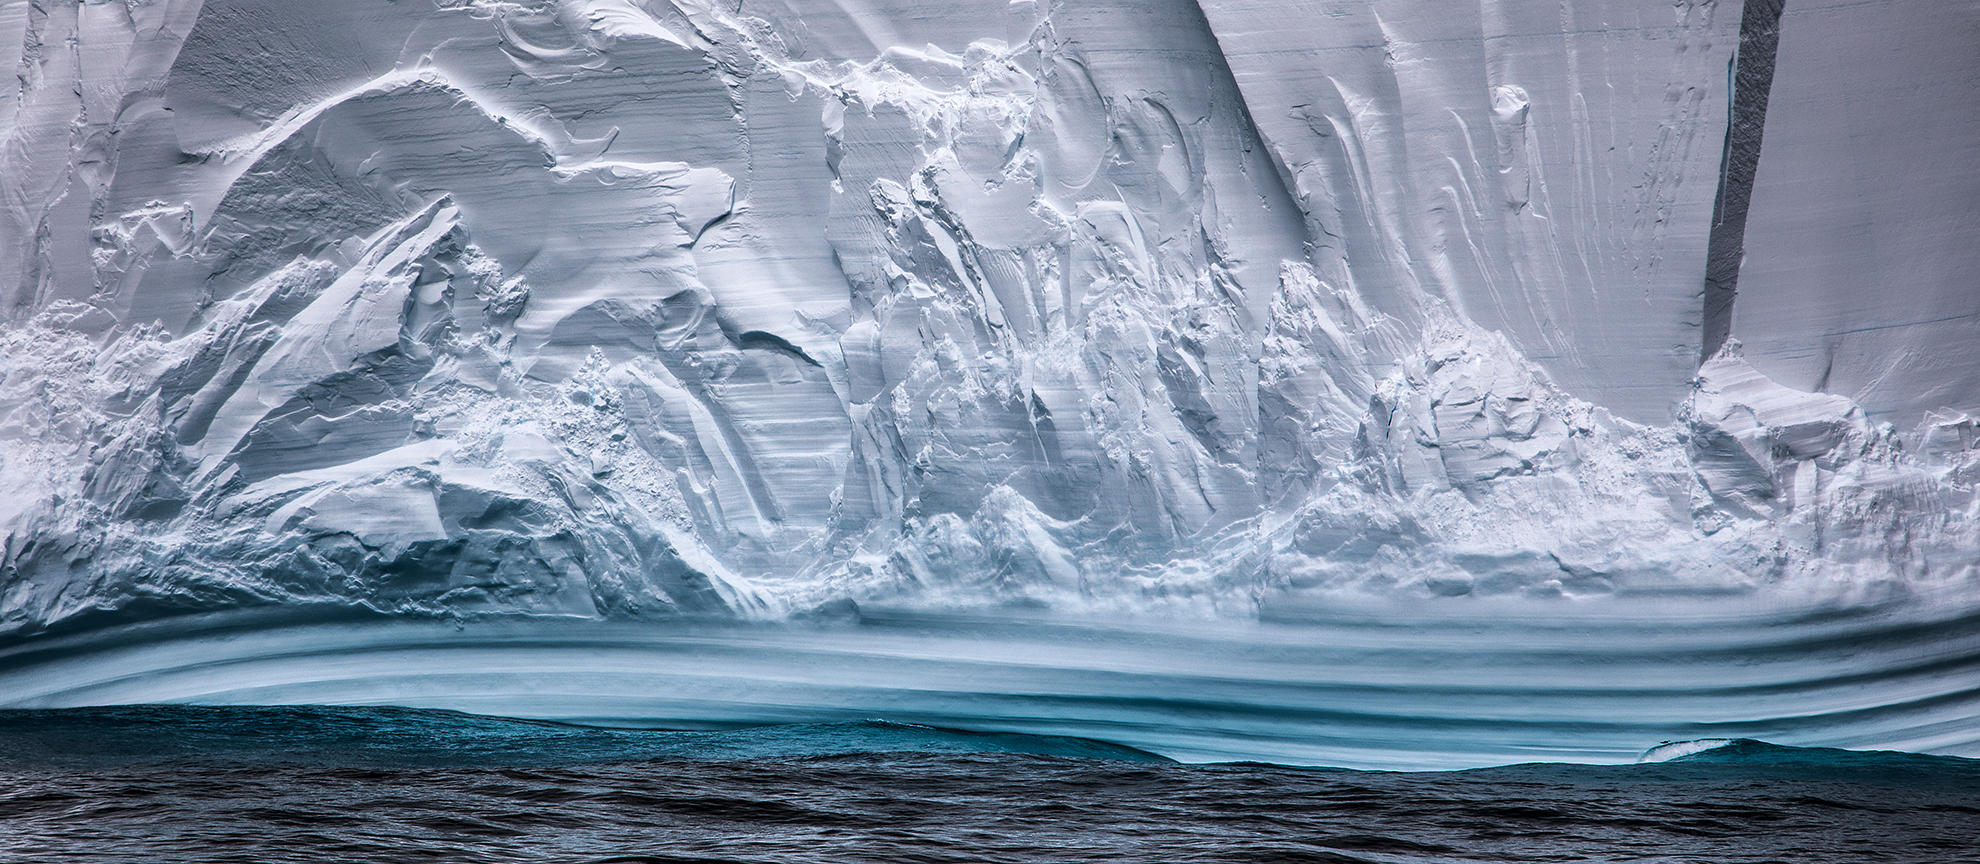 Zoomed in photo of the bottom of an iceberg showcasing the patterns created by the waves